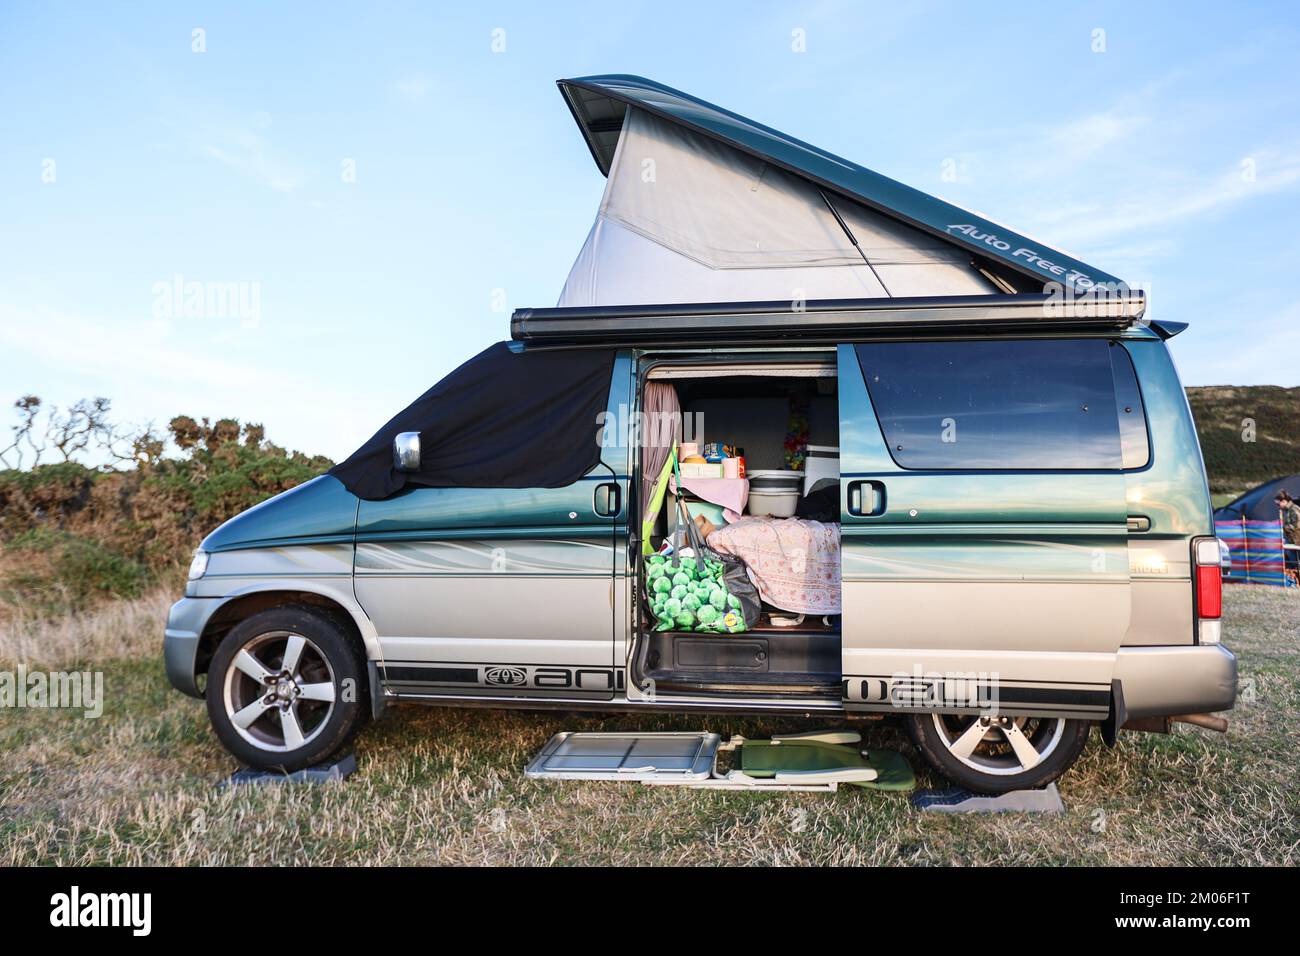 Mazda, Mazda Bongo,Mazda Bongo  Friendee,campervan,van,vanlife,parked,with,Auto Free Top,AFT,pop  top,roof,at,Camping,campsite,basic,facilities,just,cold shower,s,portable  toilet,and,running,water,almost,wild camping,at,Remote,north  coast,coastline,of ...